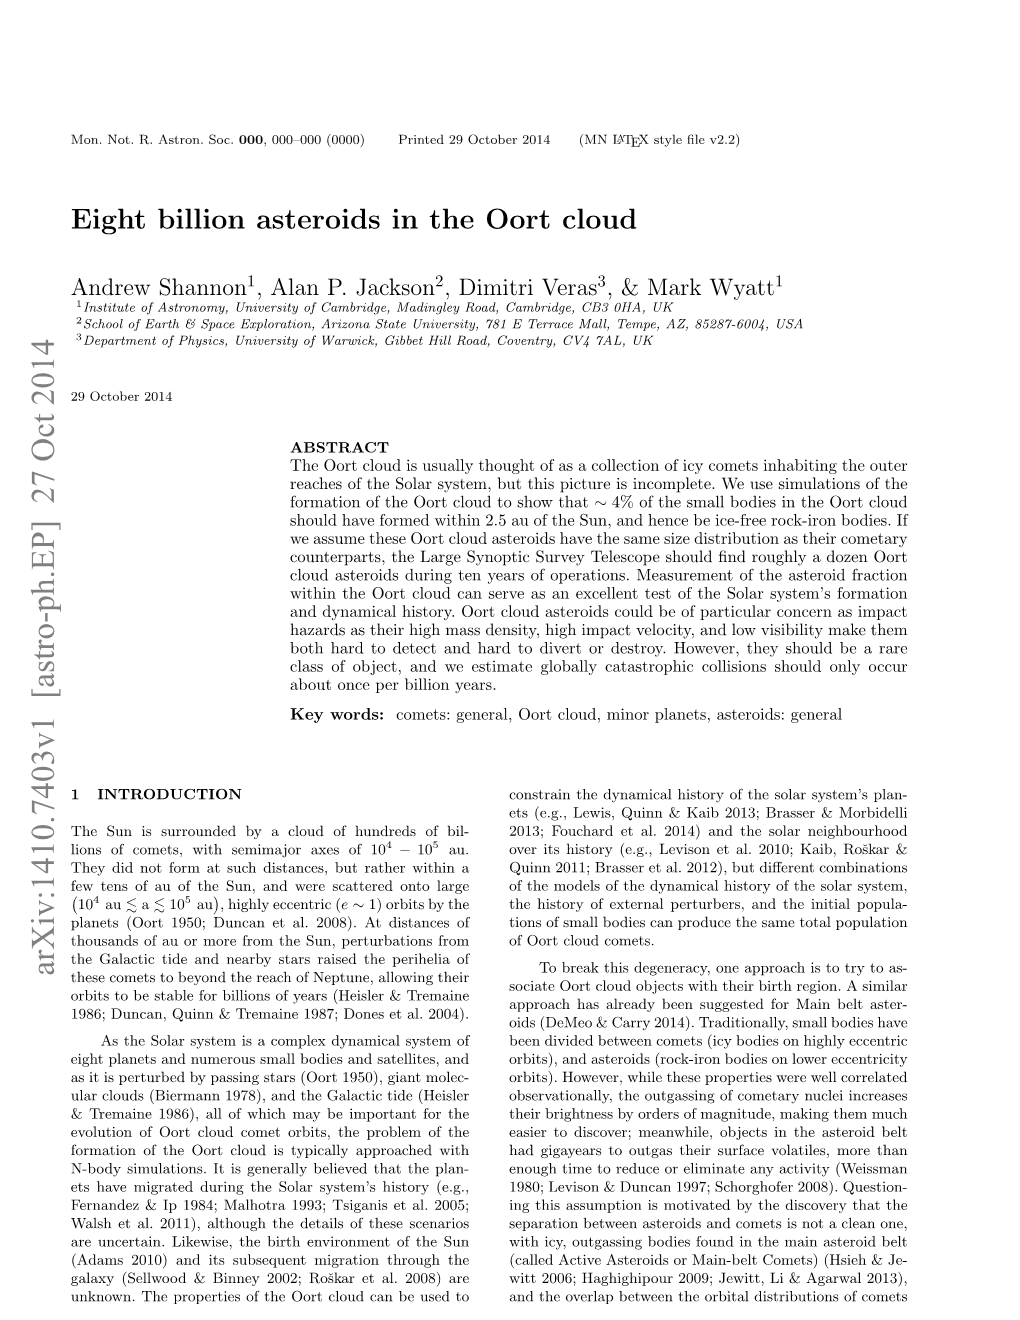 Eight Billion Asteroids in the Oort Cloud